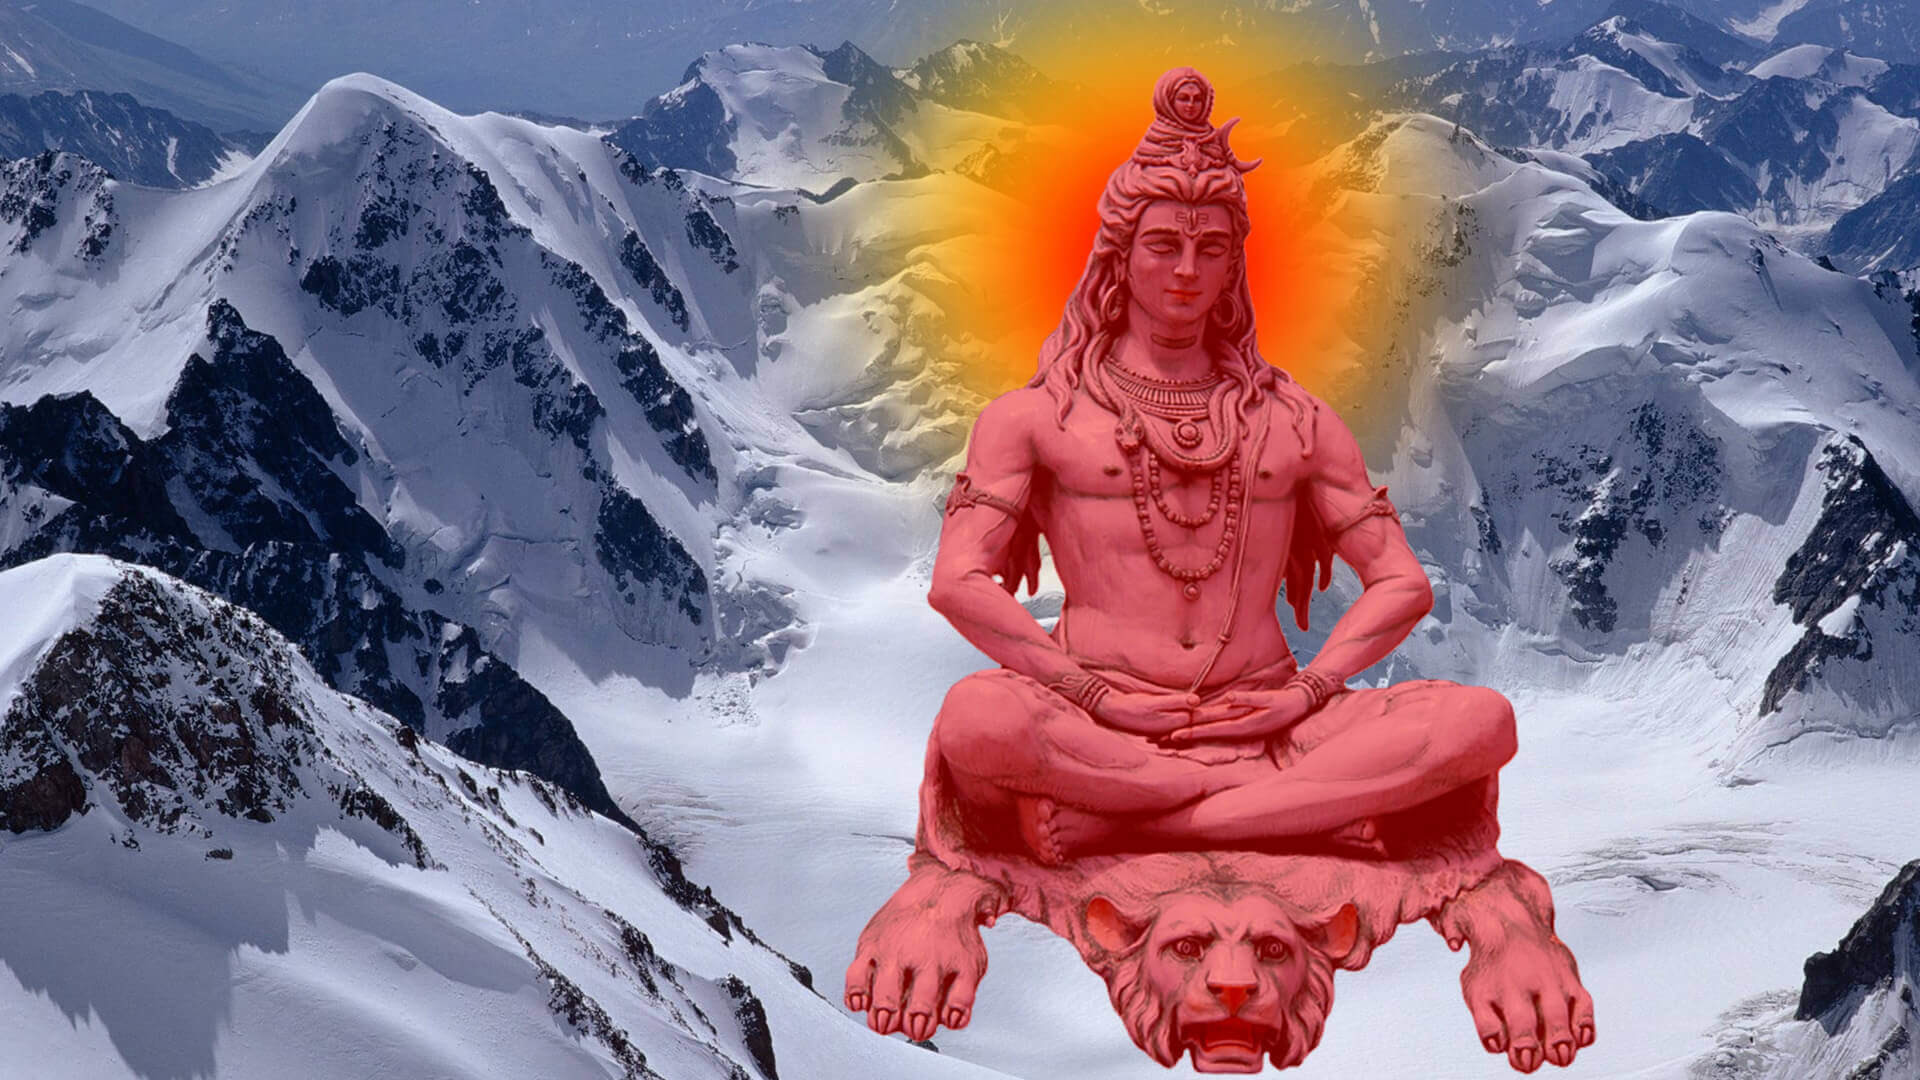 1920x1080 Download lord shiva hd images hd 1920p